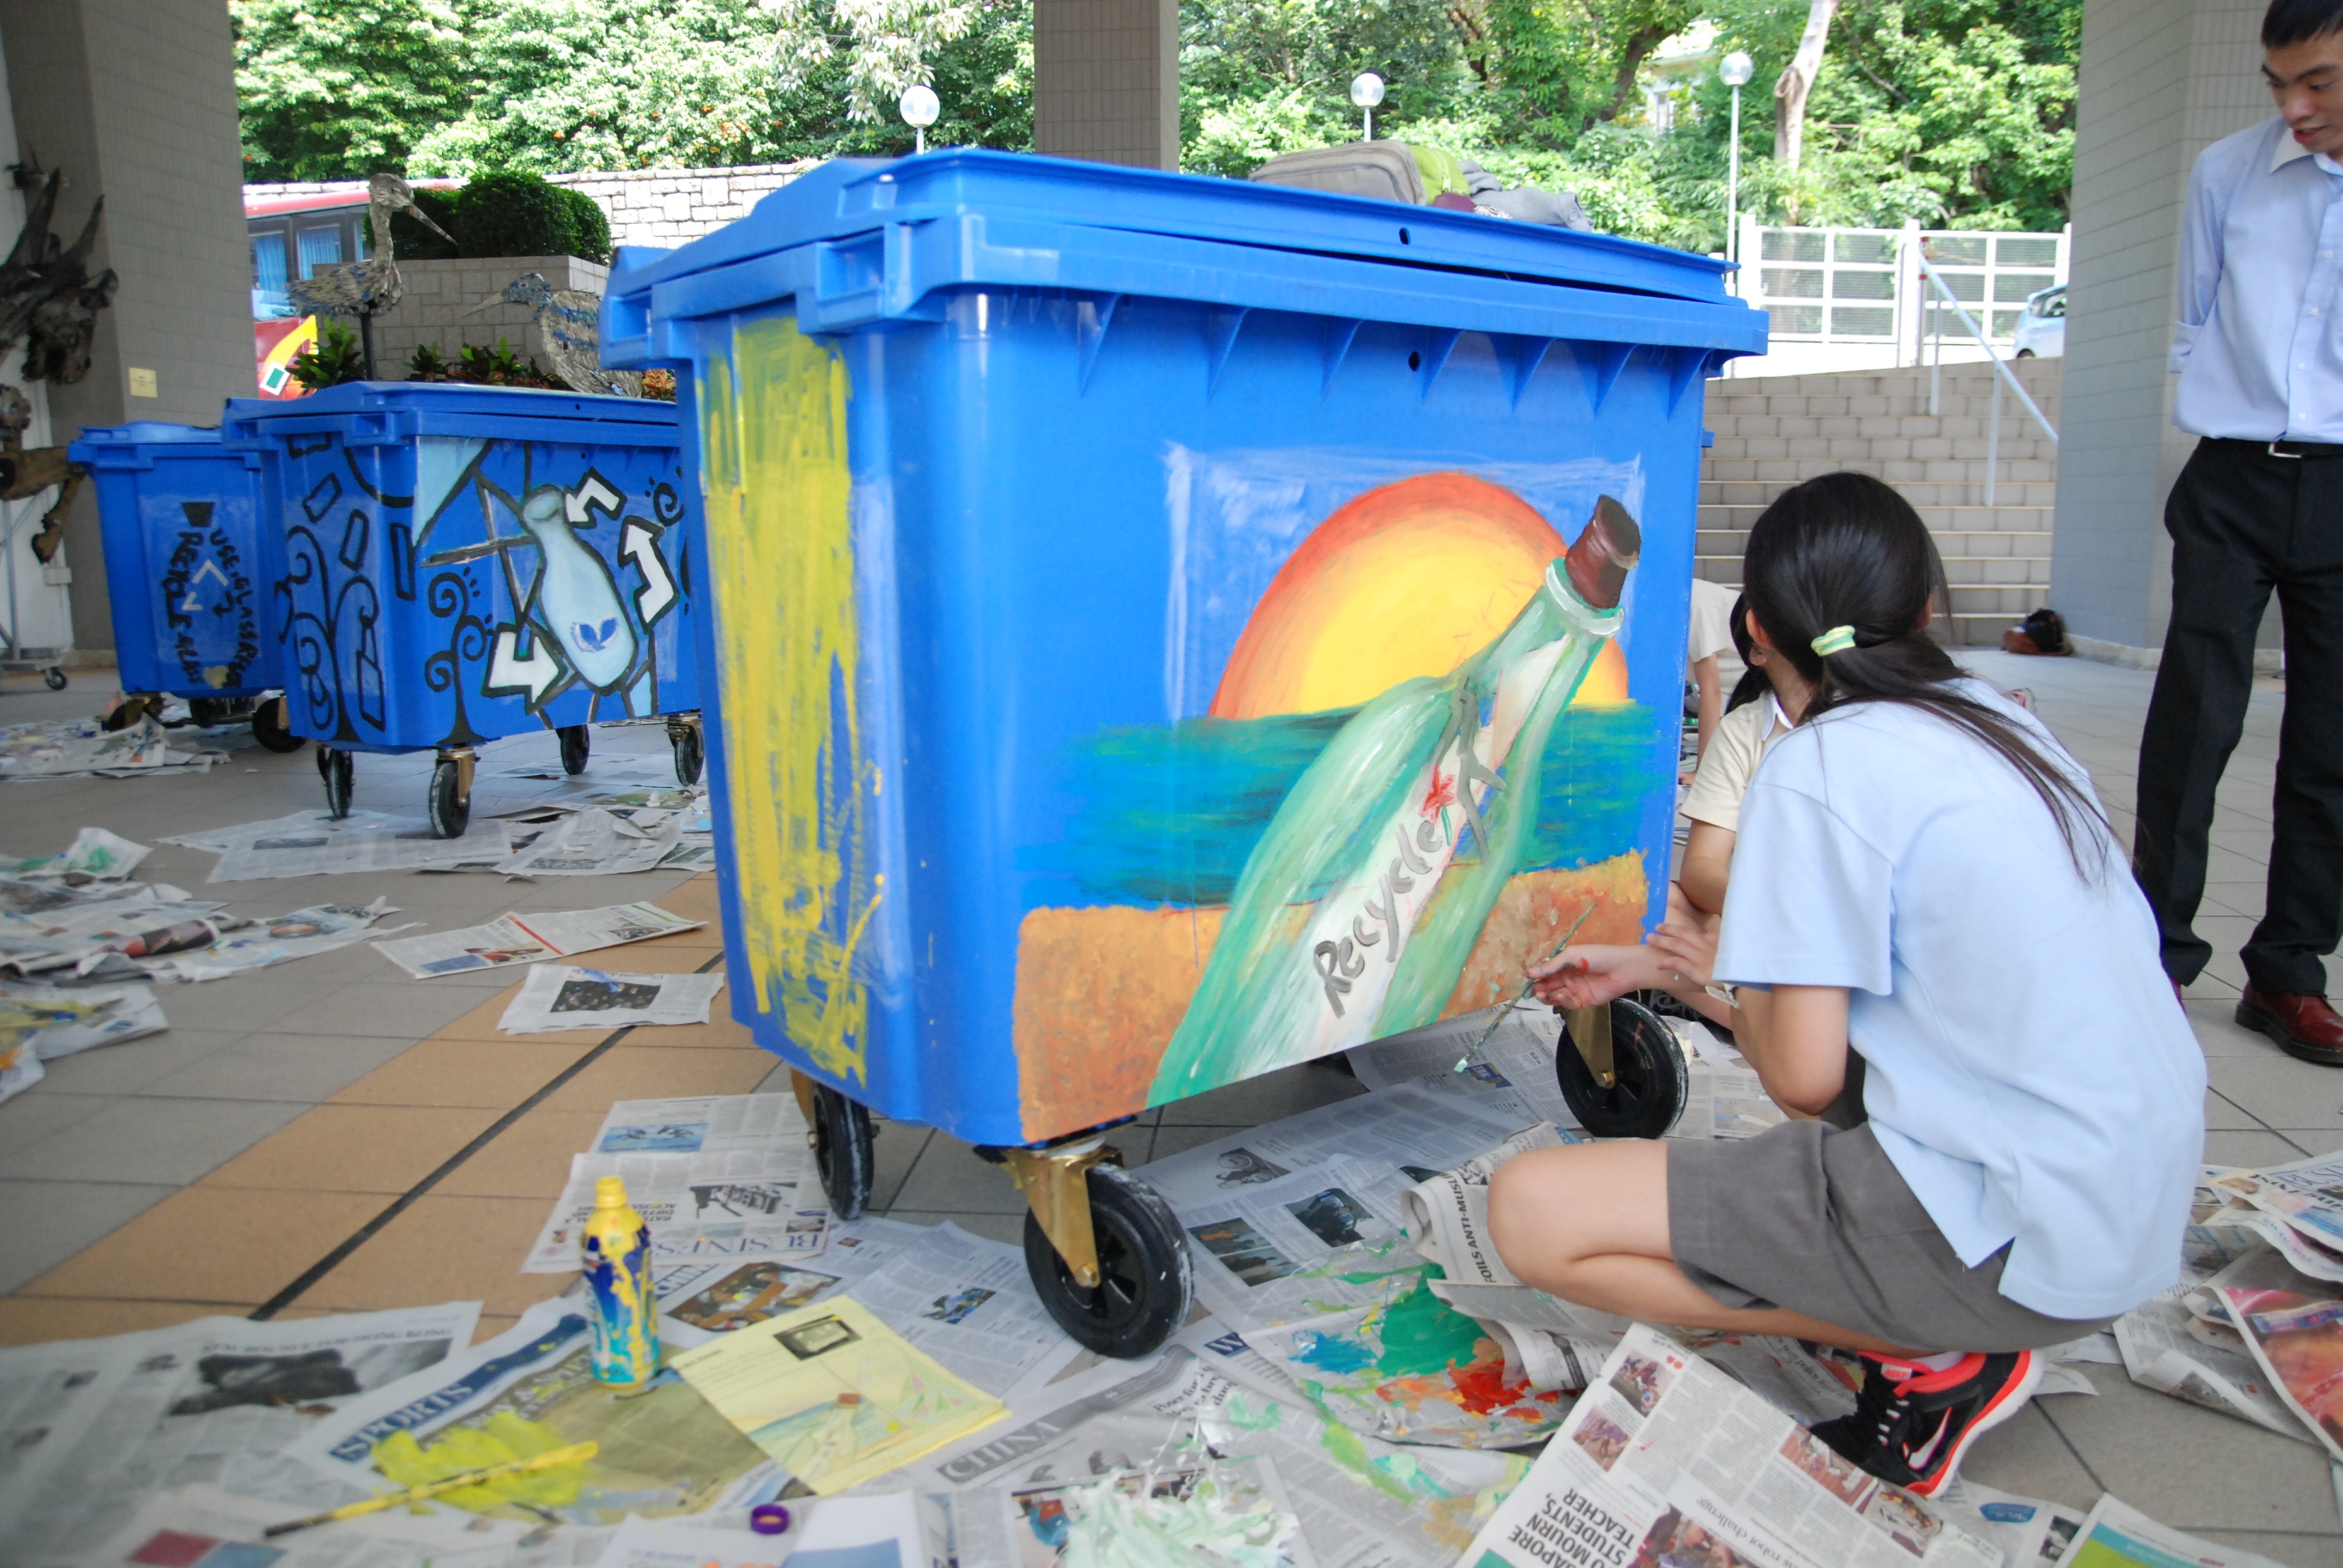 Students painting on glass recycling bins